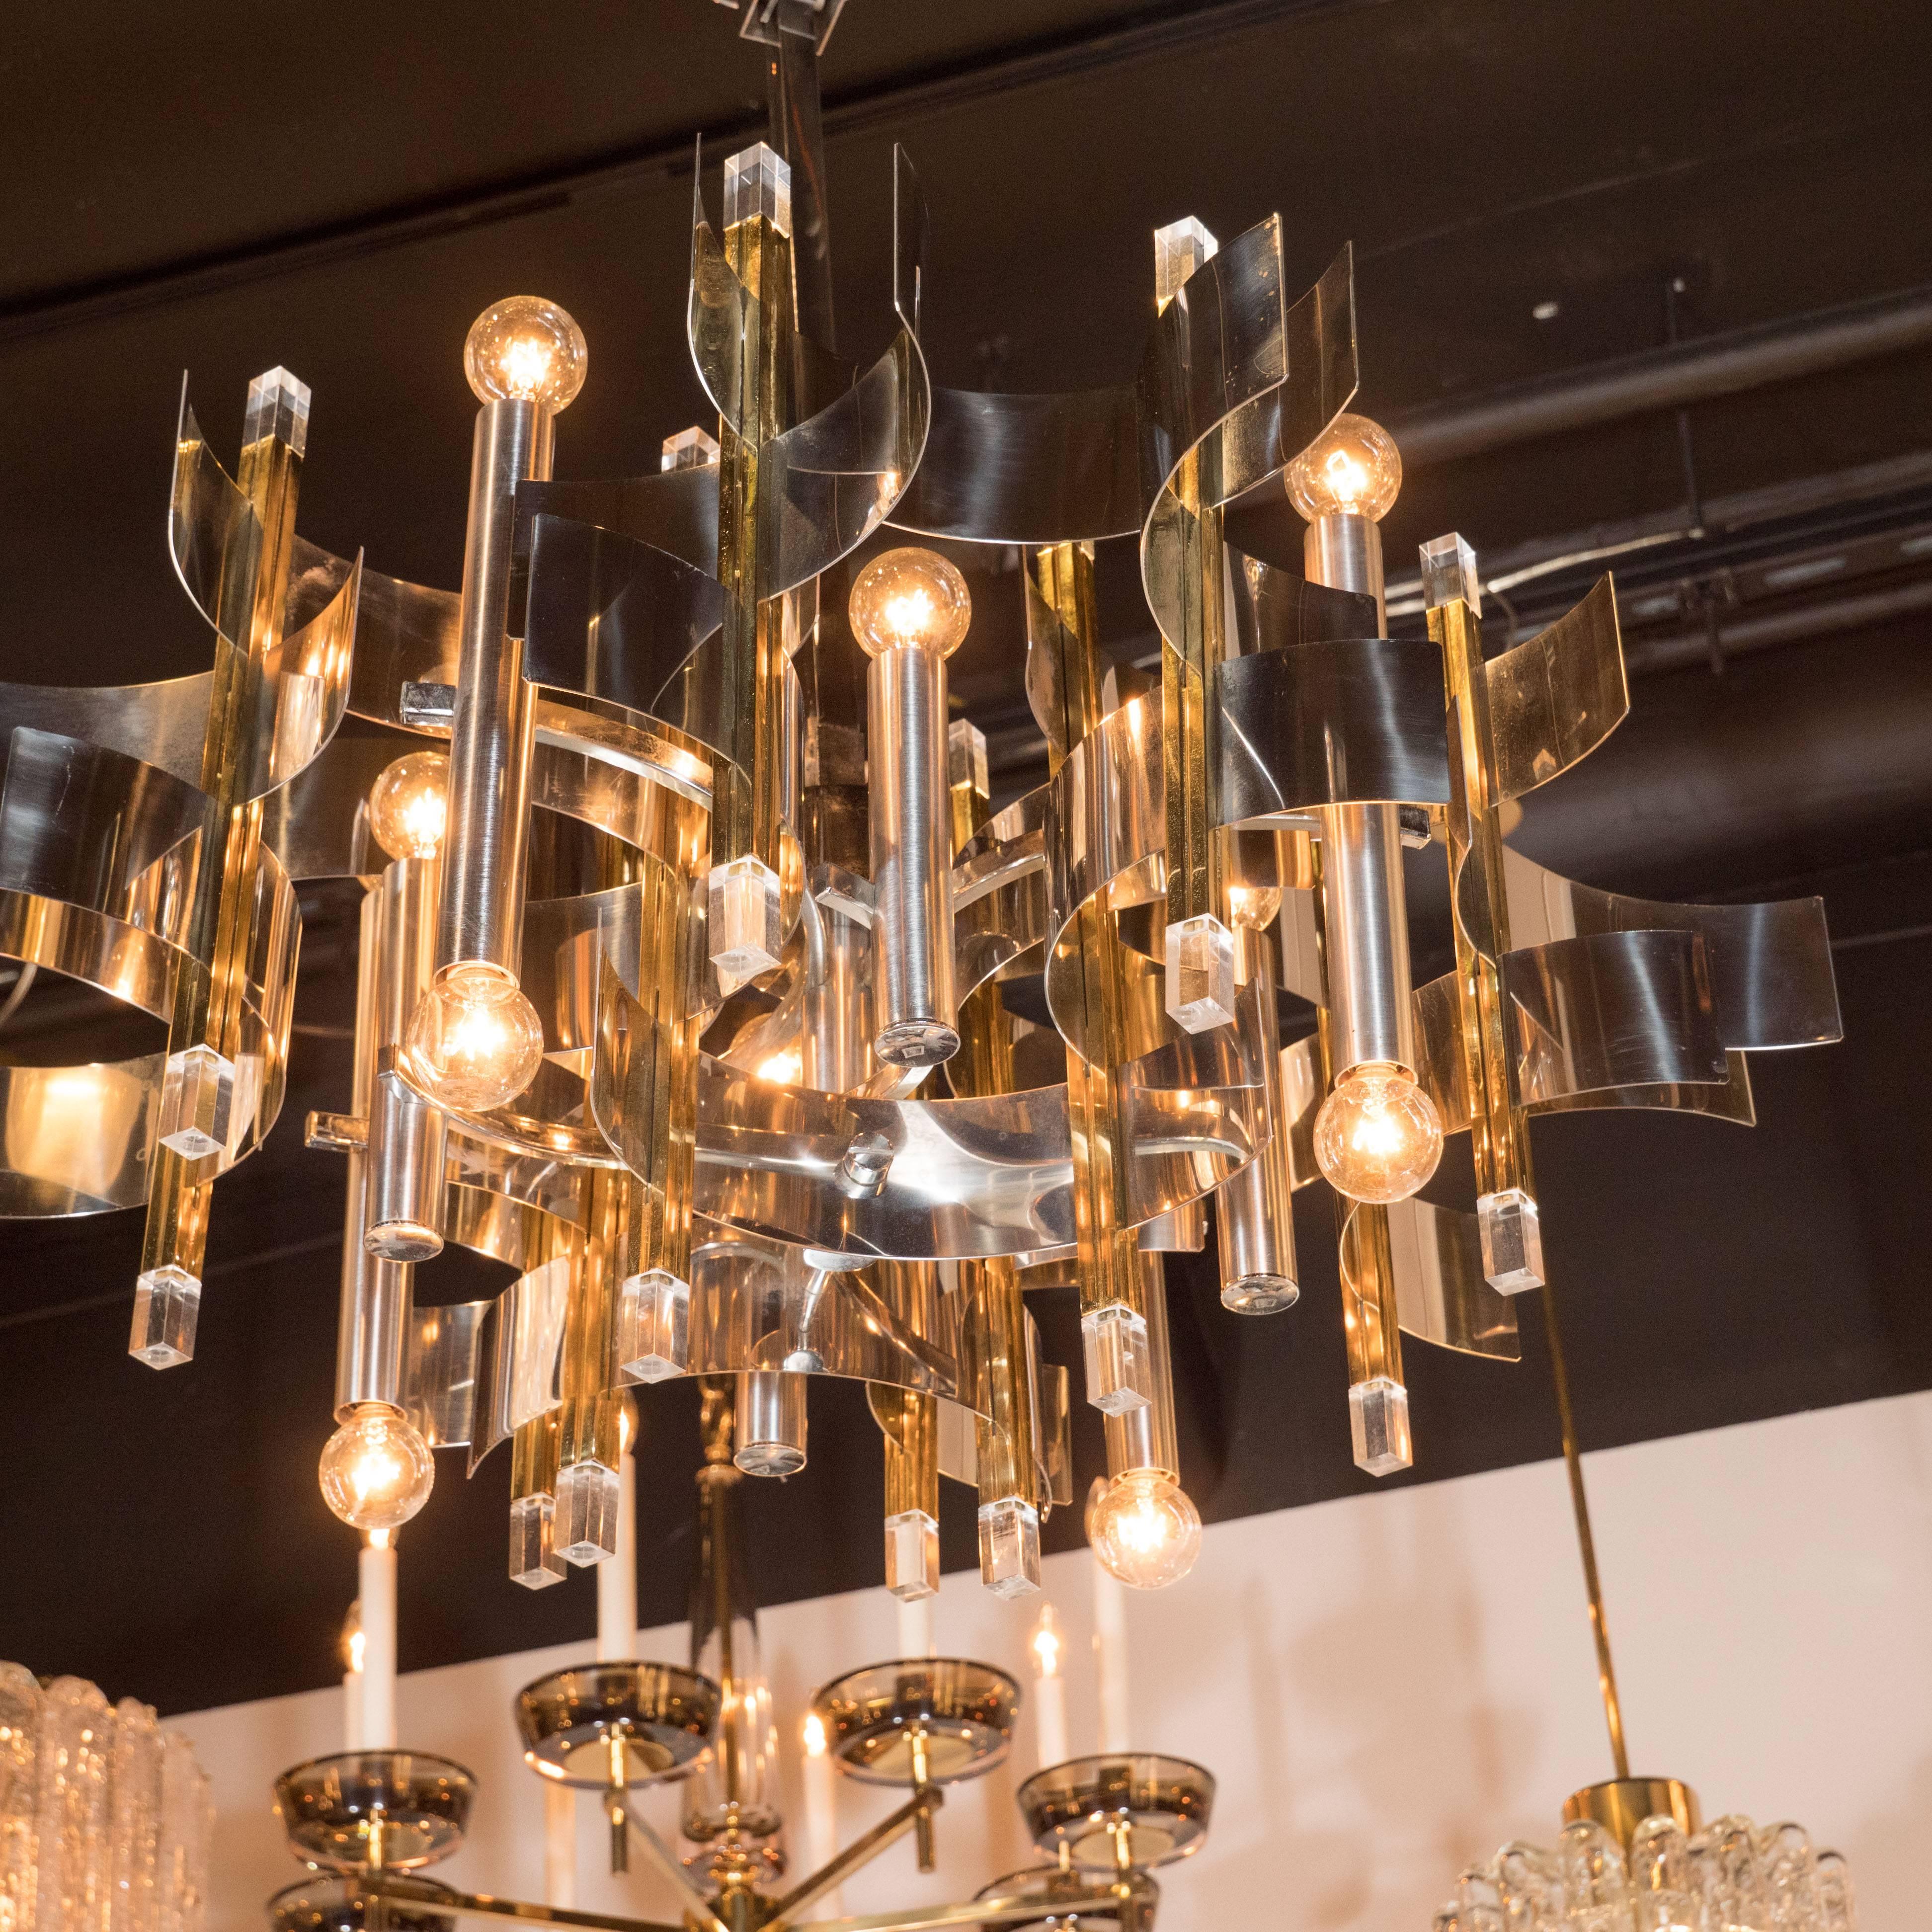 Polished Italian Mid-Century Modern Brass, Chrome and Lucite Chandelier by Sciolari